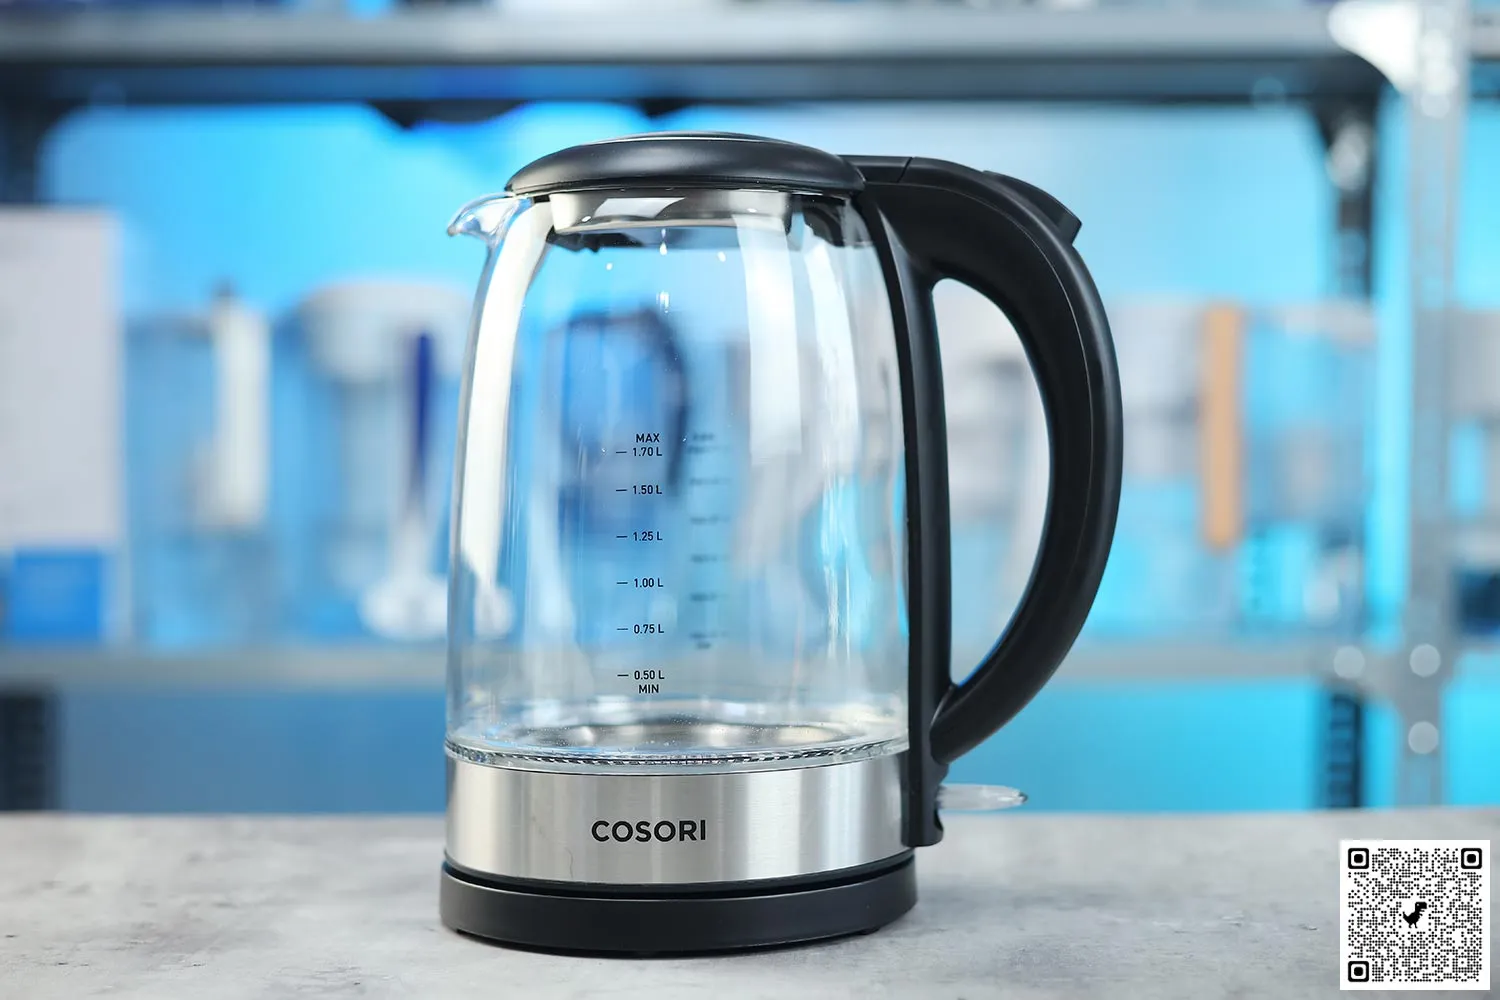 https://cdn.healthykitchen101.com/reviews/images/kettles/cosori-glass-electric-kettle-gk172-co-carafe-clleom0go0005zb88c4199i3c.jpg